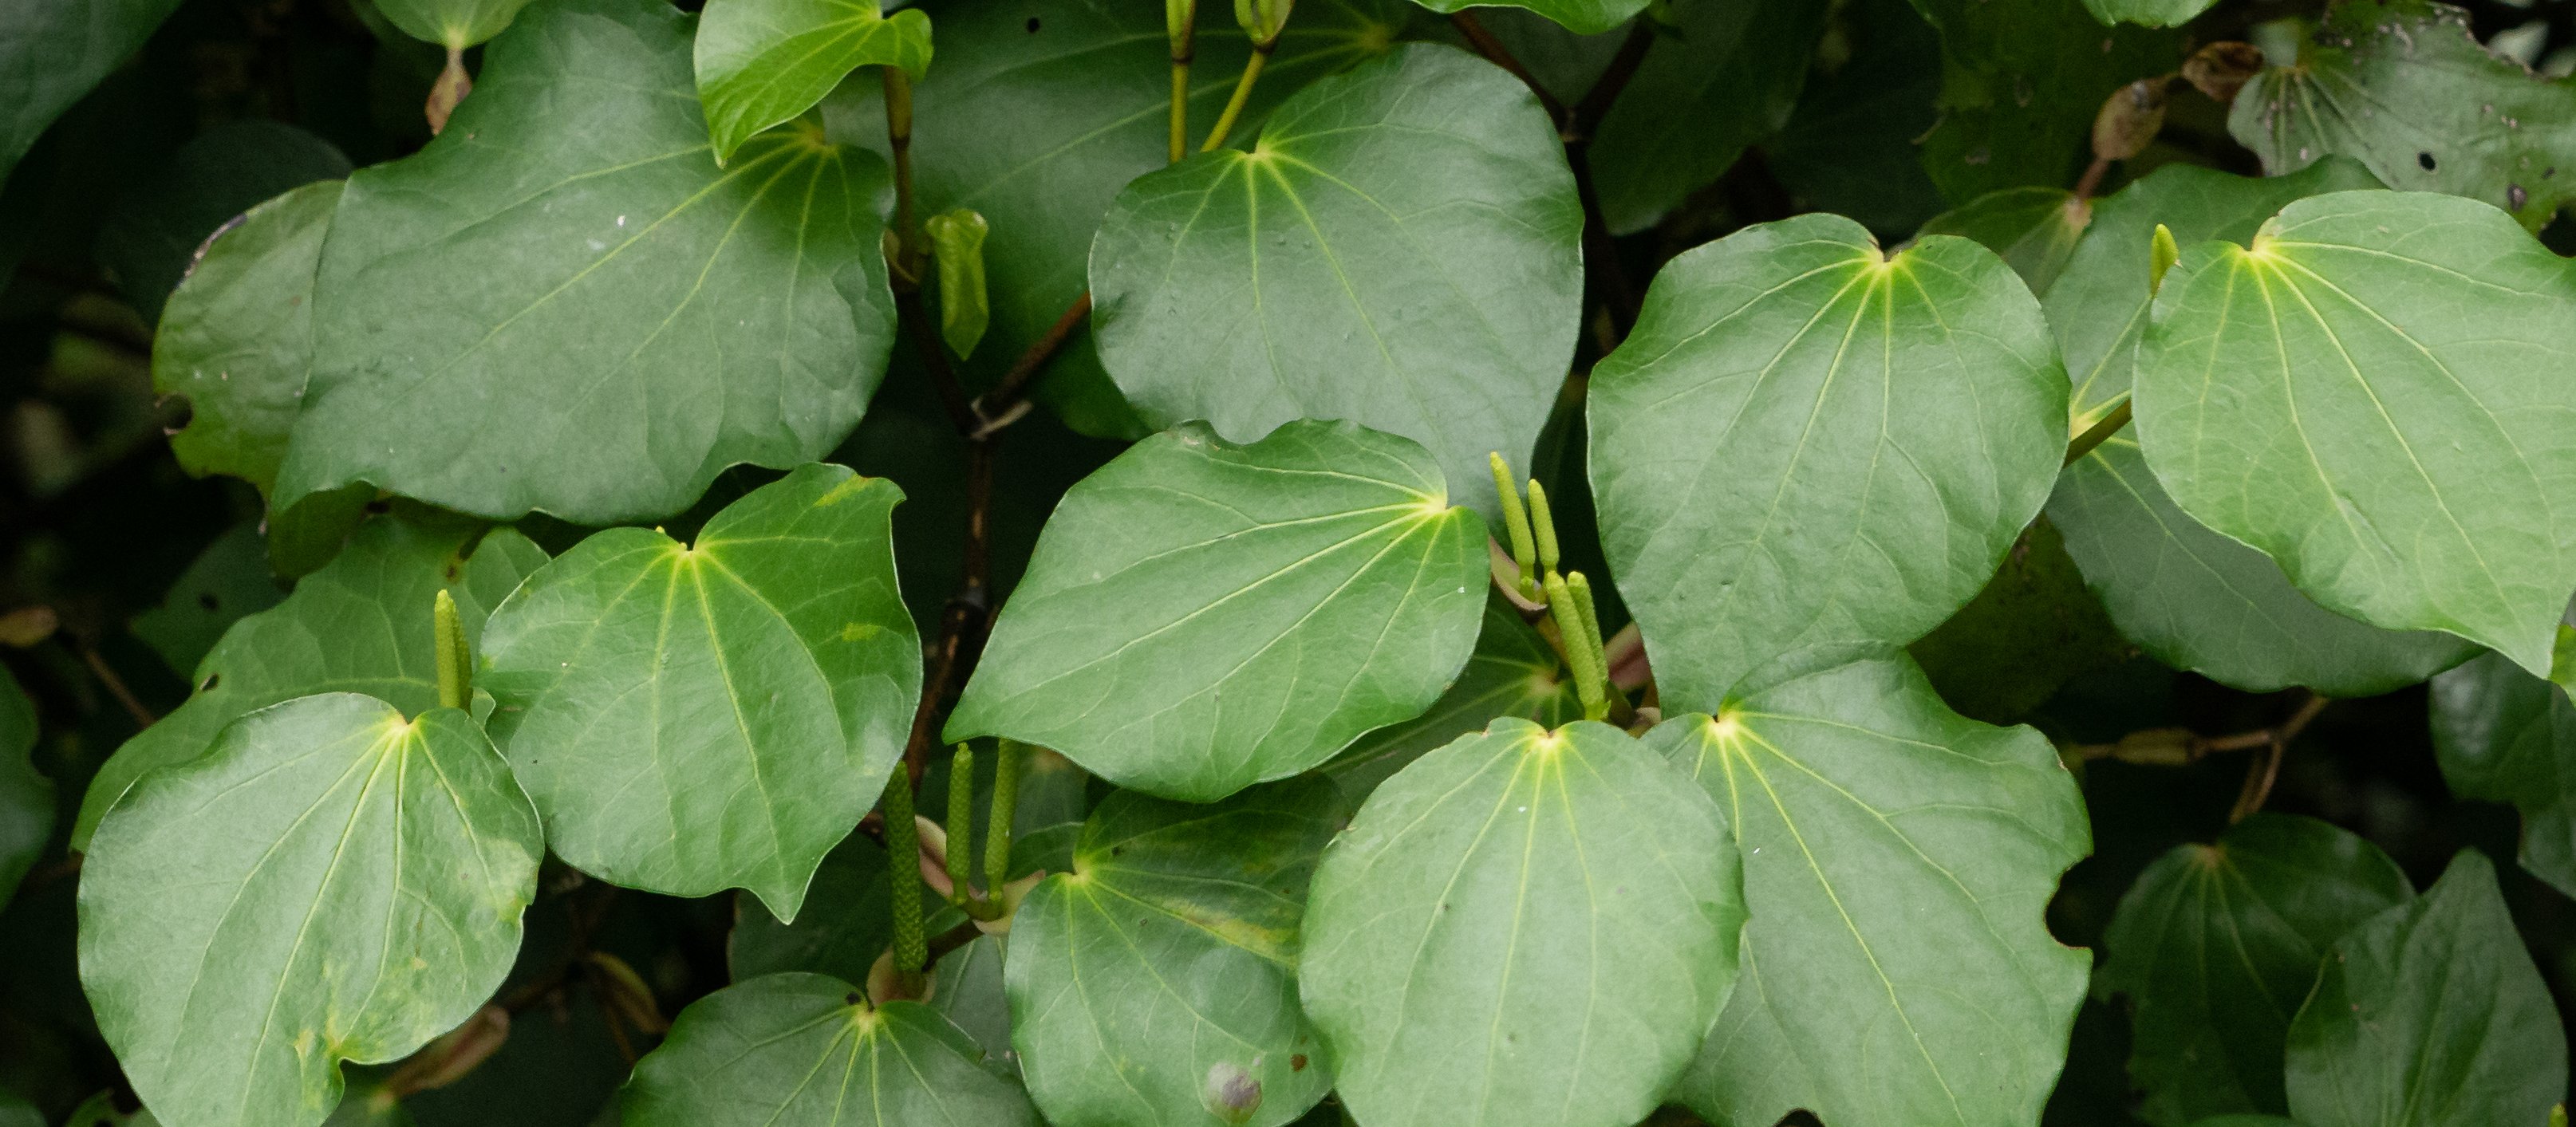 Kawakawa is botanically related to kava, and its leaves are most often used for medicinal purposes